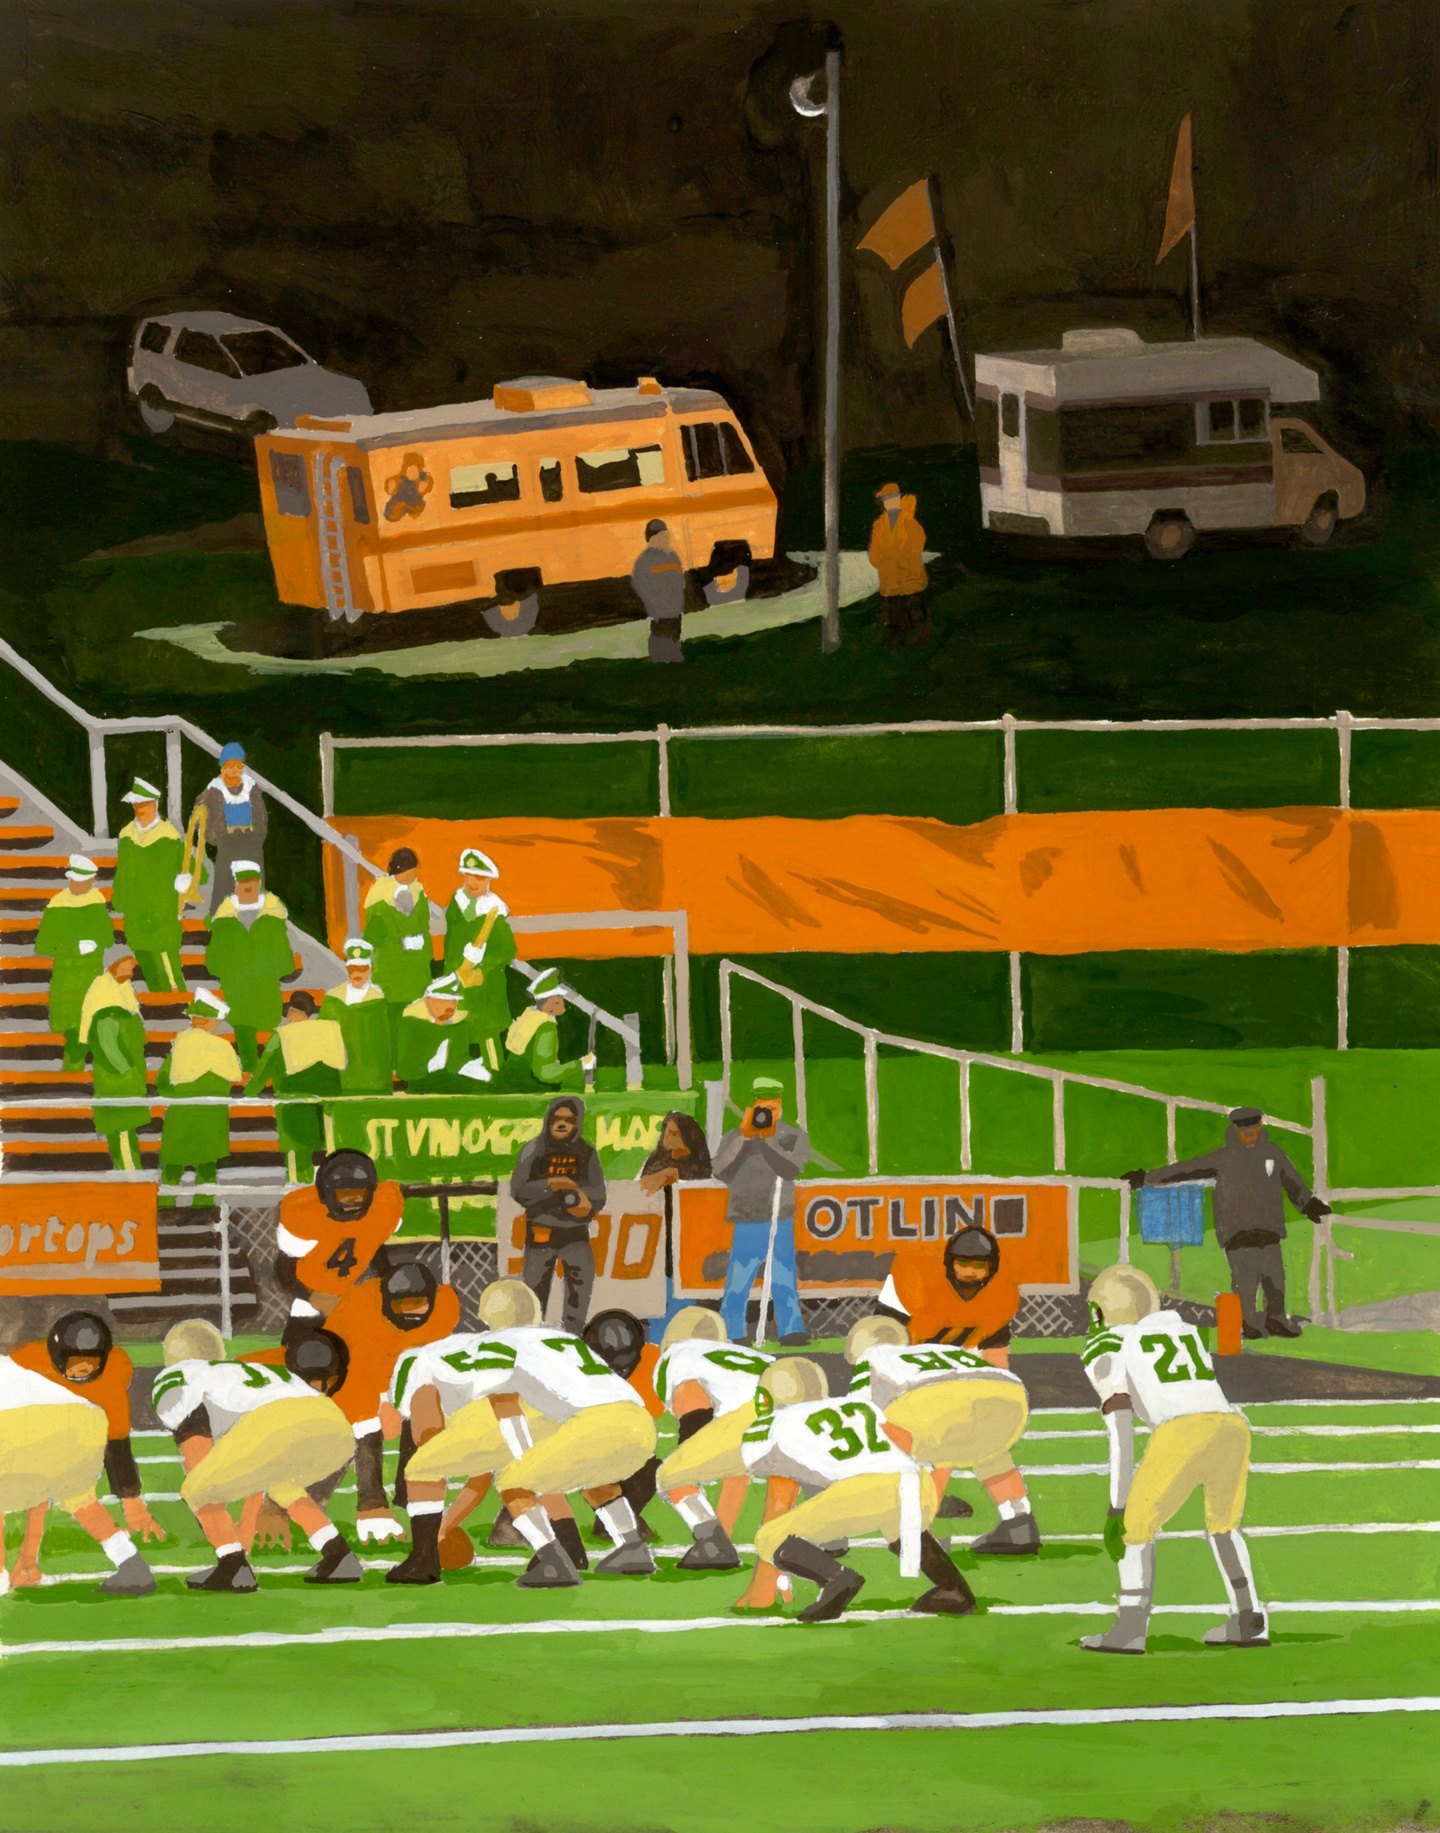 An illustration of an American football match: the players in formation at the start of the game, with onlookers on the bleachers/stands. In the background are three vehicles, the second of which (is orange and) is illuminated by a light, which casts a shadow over the two other cars. The illustration uses orange, green, yellow and other earth tones as its main hues.